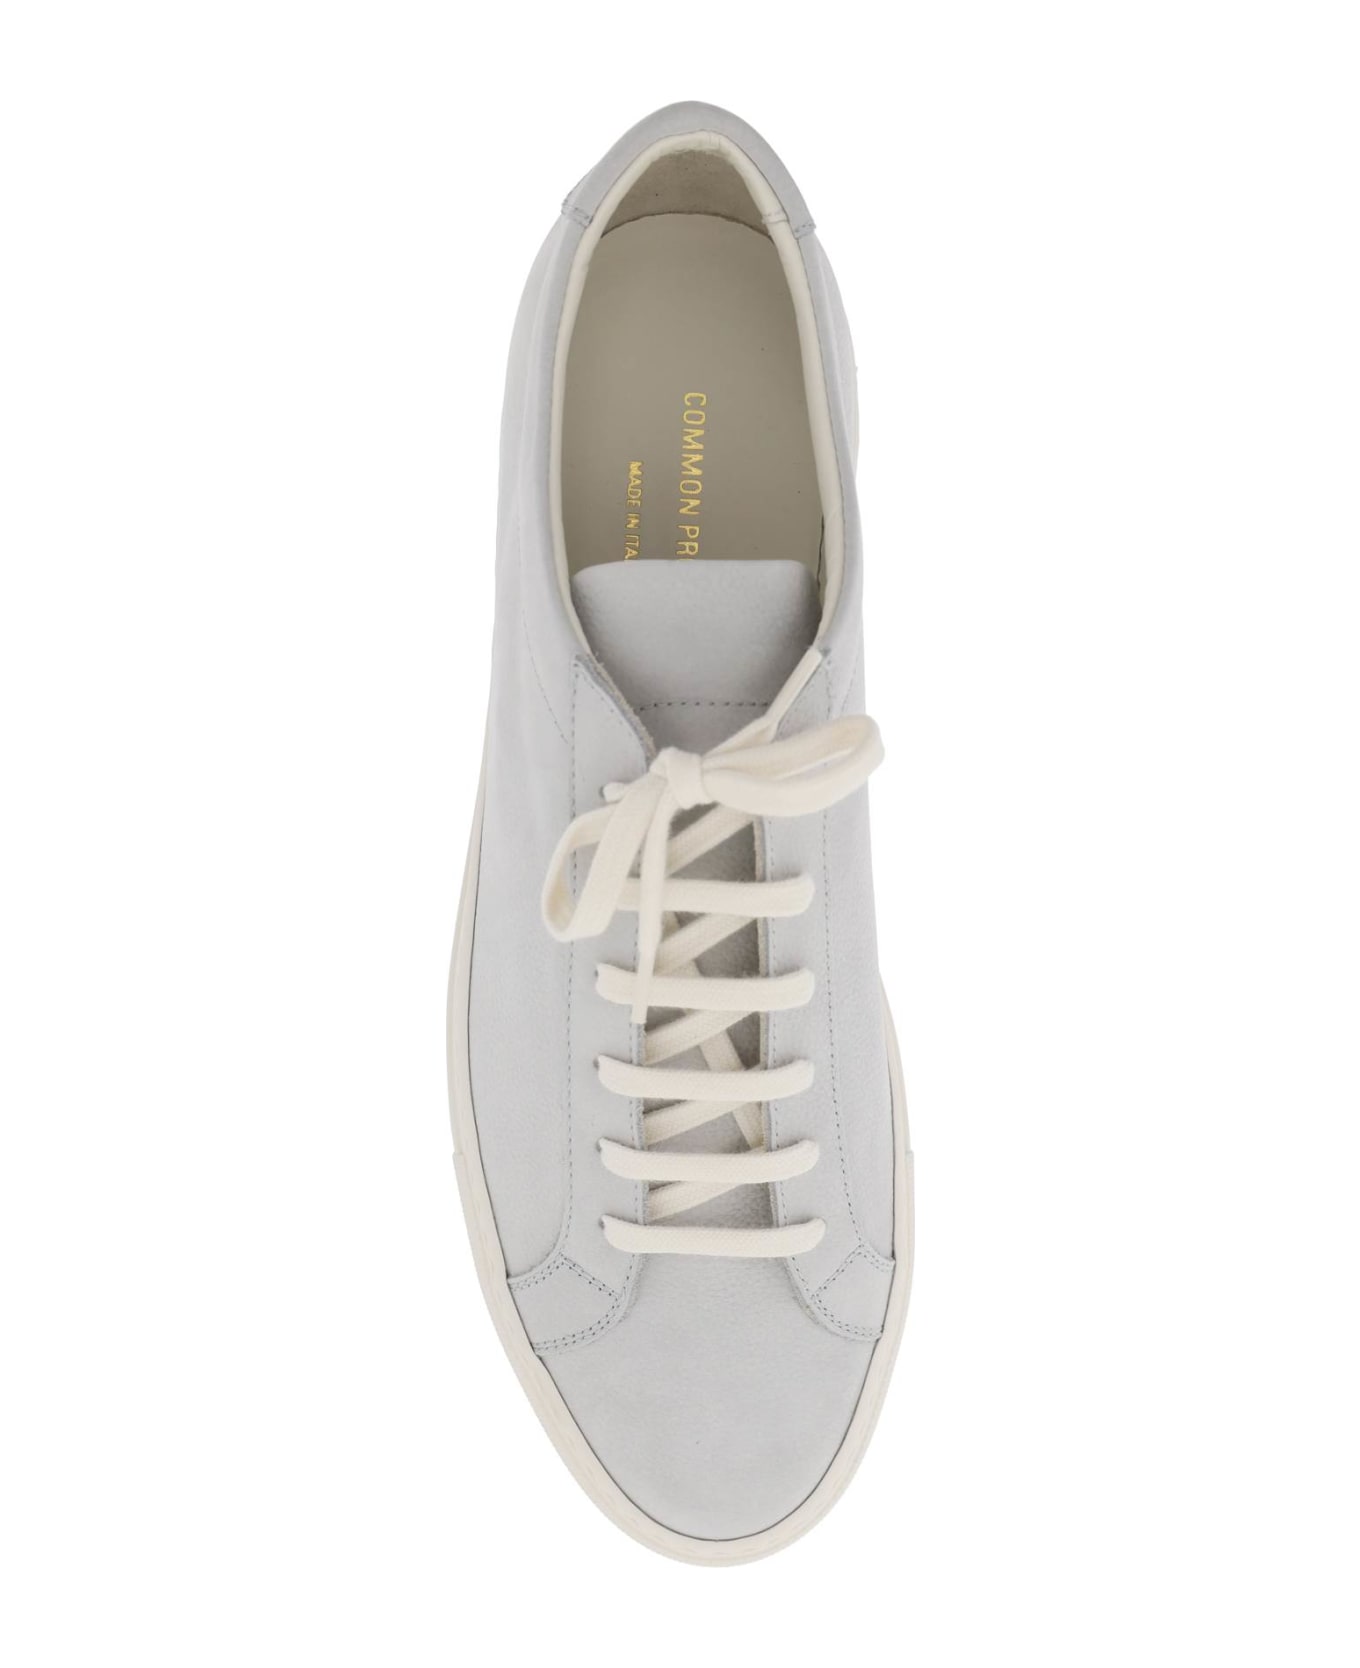 Common Projects Original Achilles Leather Sneakers - GREY (Grey)